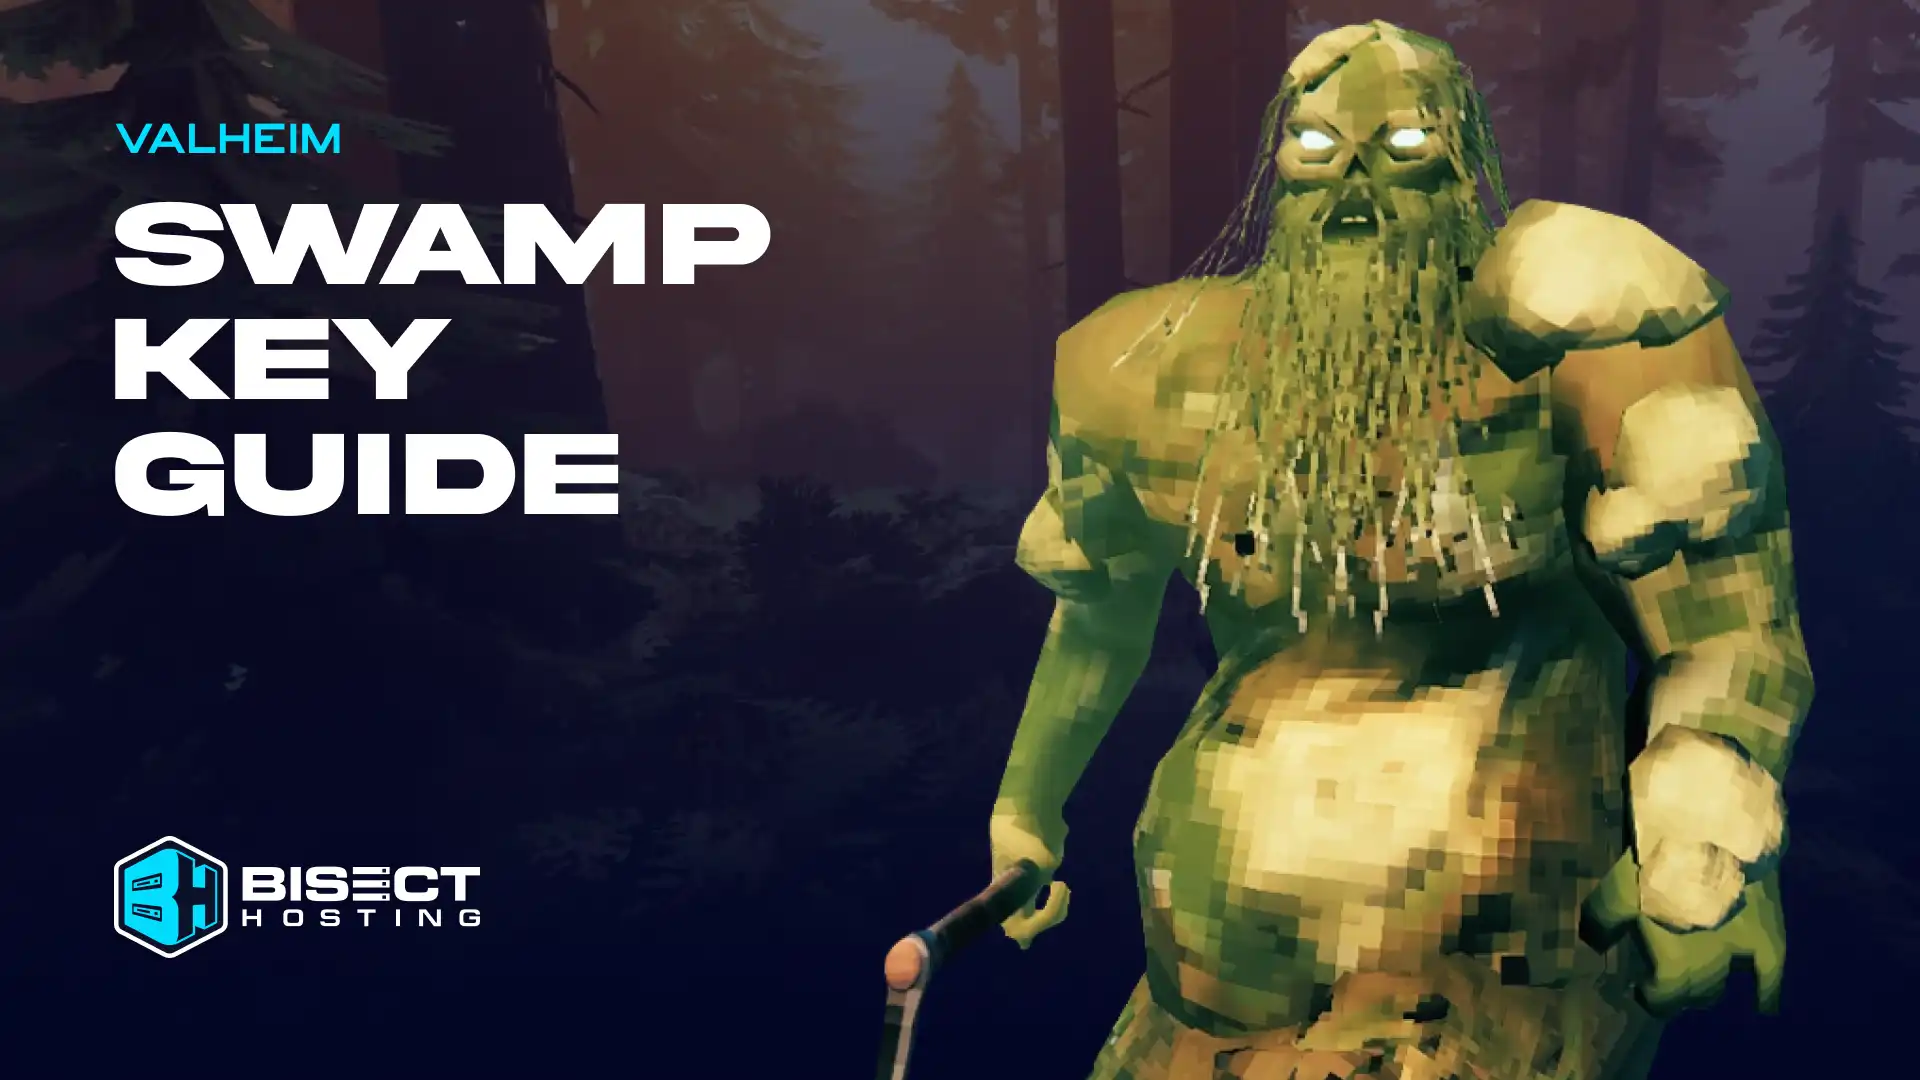 How to Get the Swamp Key in Valheim